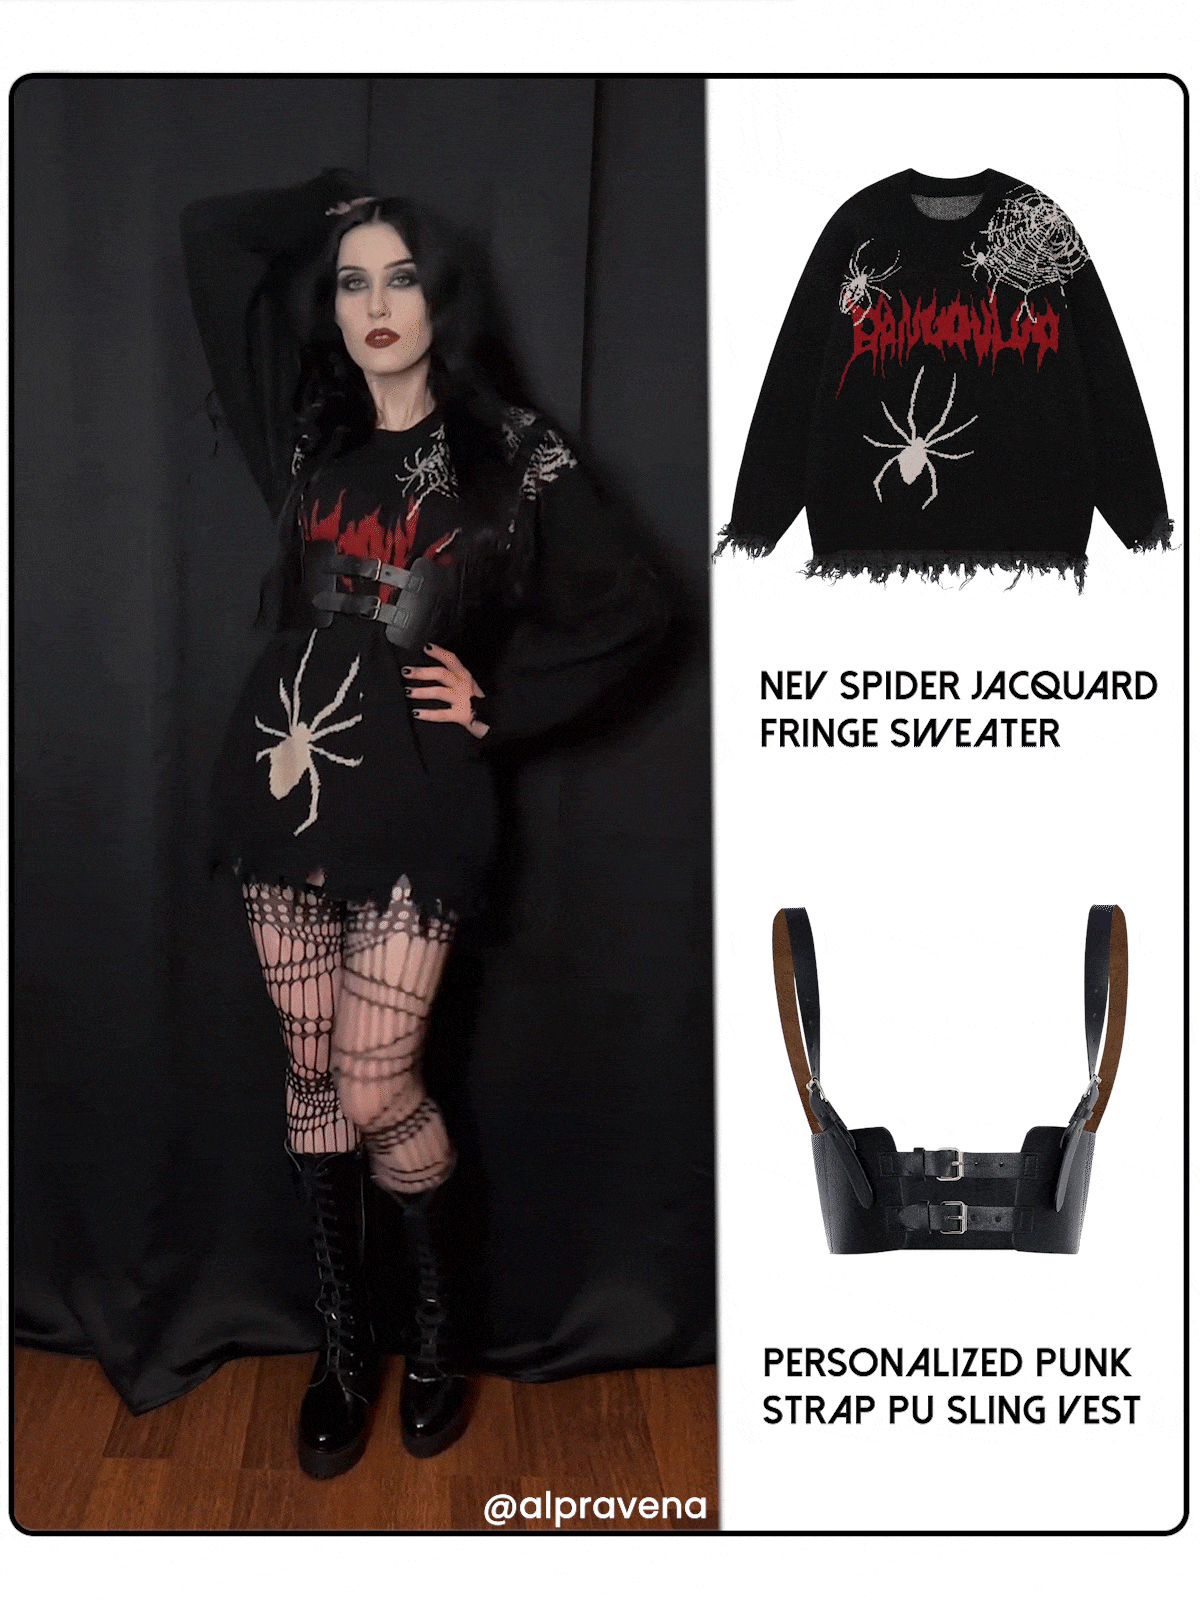 Personalized Punk Strap PU Sling Vest <font color="#95a6ce"><br>Available for Pre-Order<br>This item will be available soon</font>